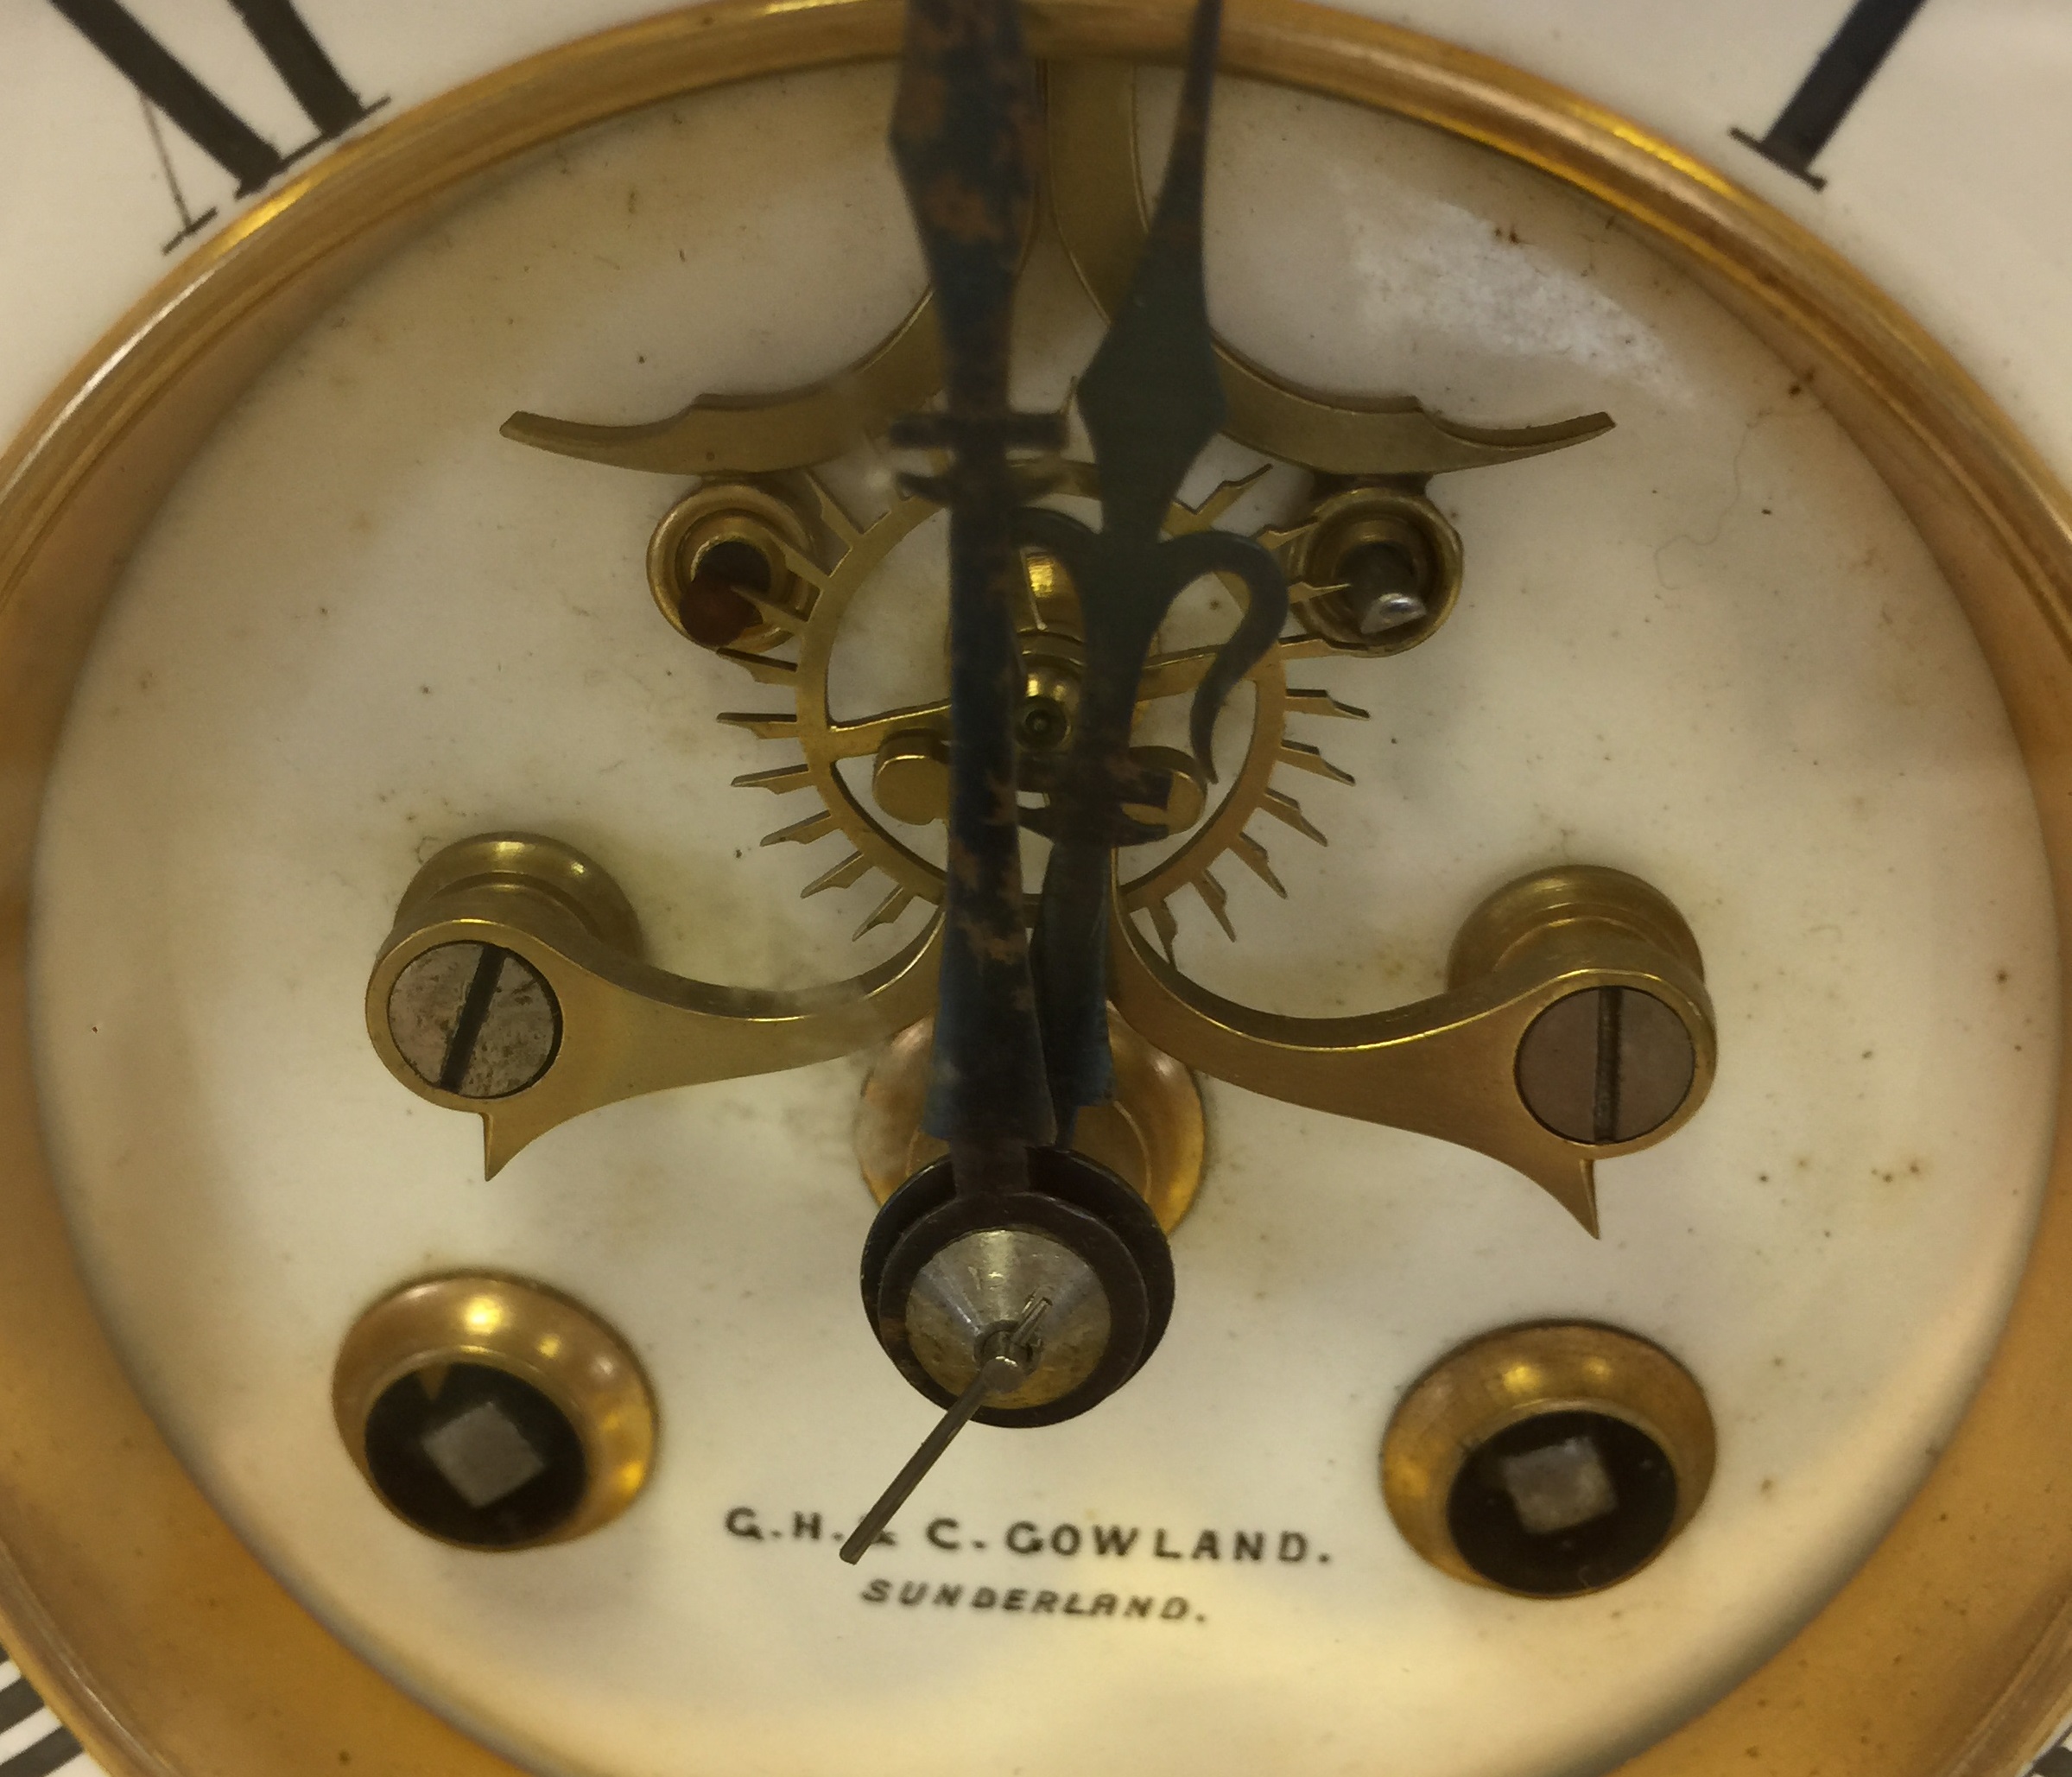 FRENCH FOUR GLASS MANTEL CLOCK. Marked to face G.H & C Gowland, Sunderland. Probably circa 1860s. - Image 3 of 8